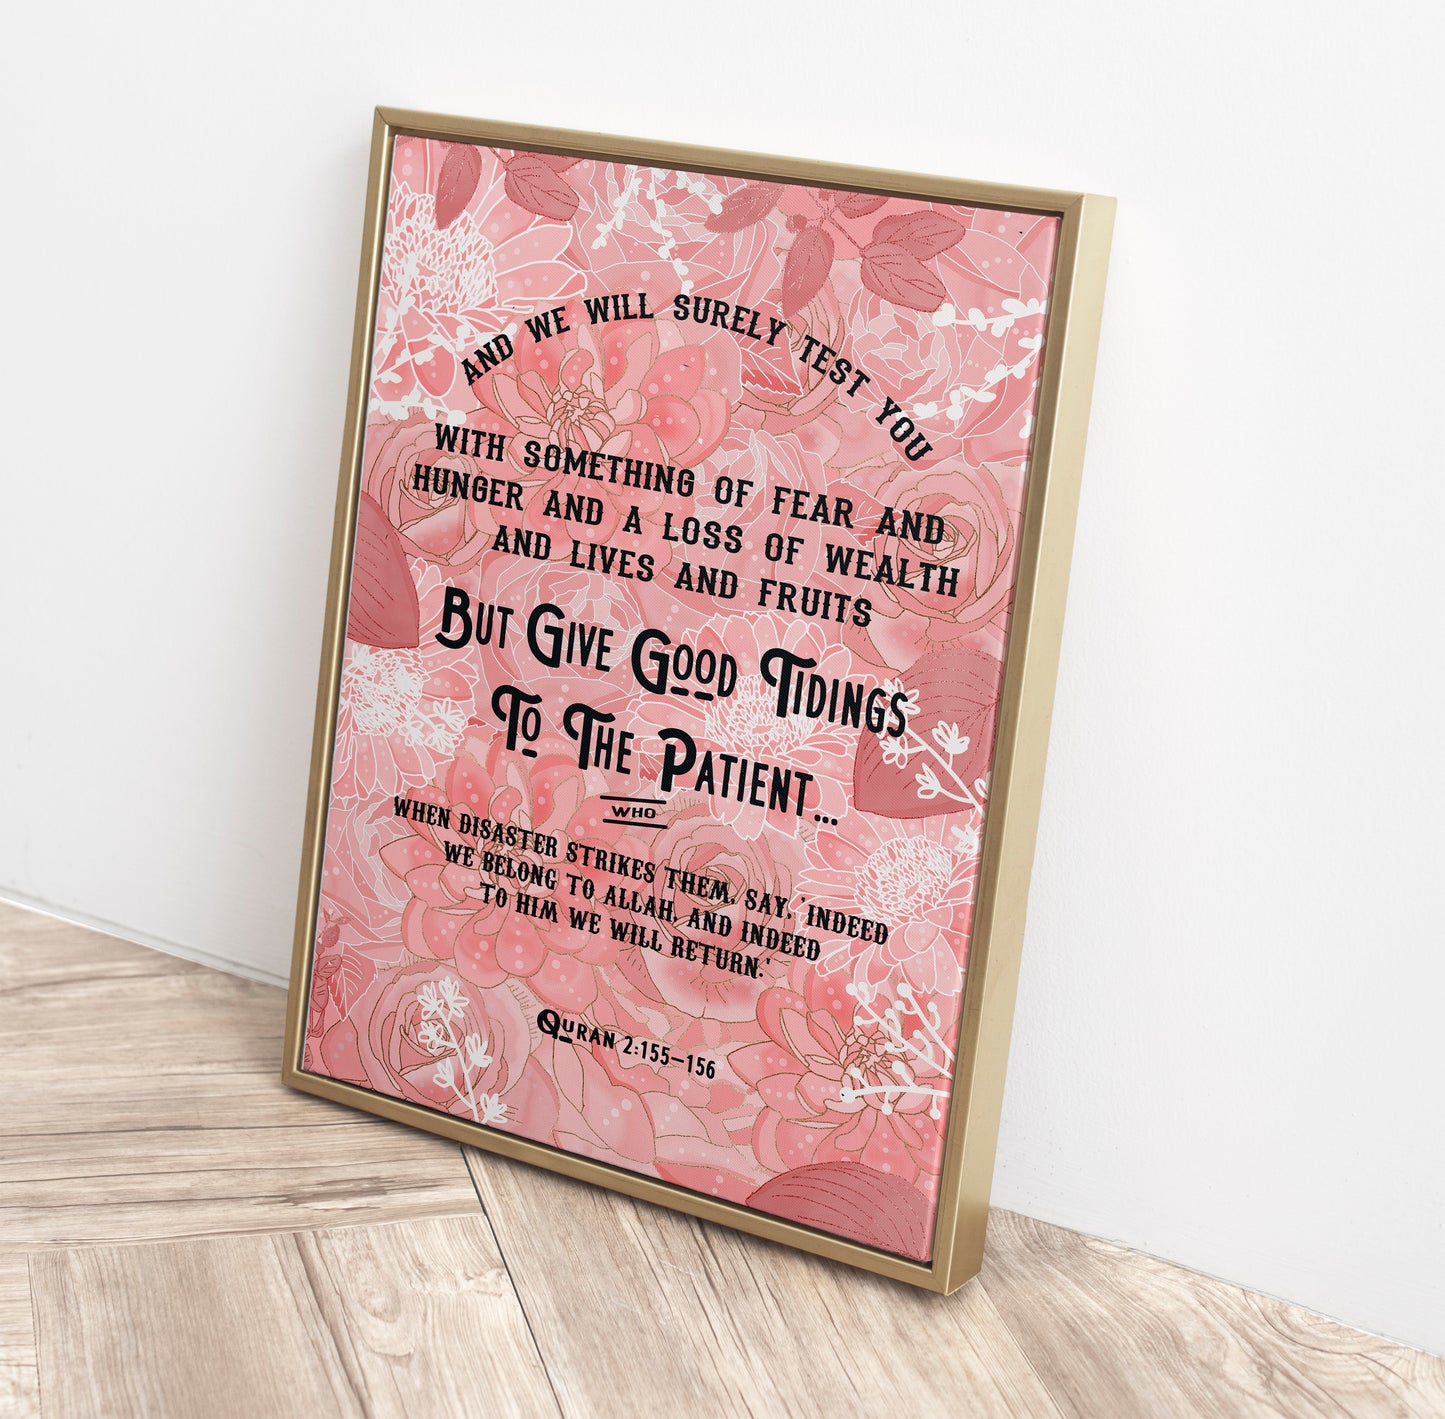 Vintage Peach Floral typography, islamic floral typography, peach pink floral typography